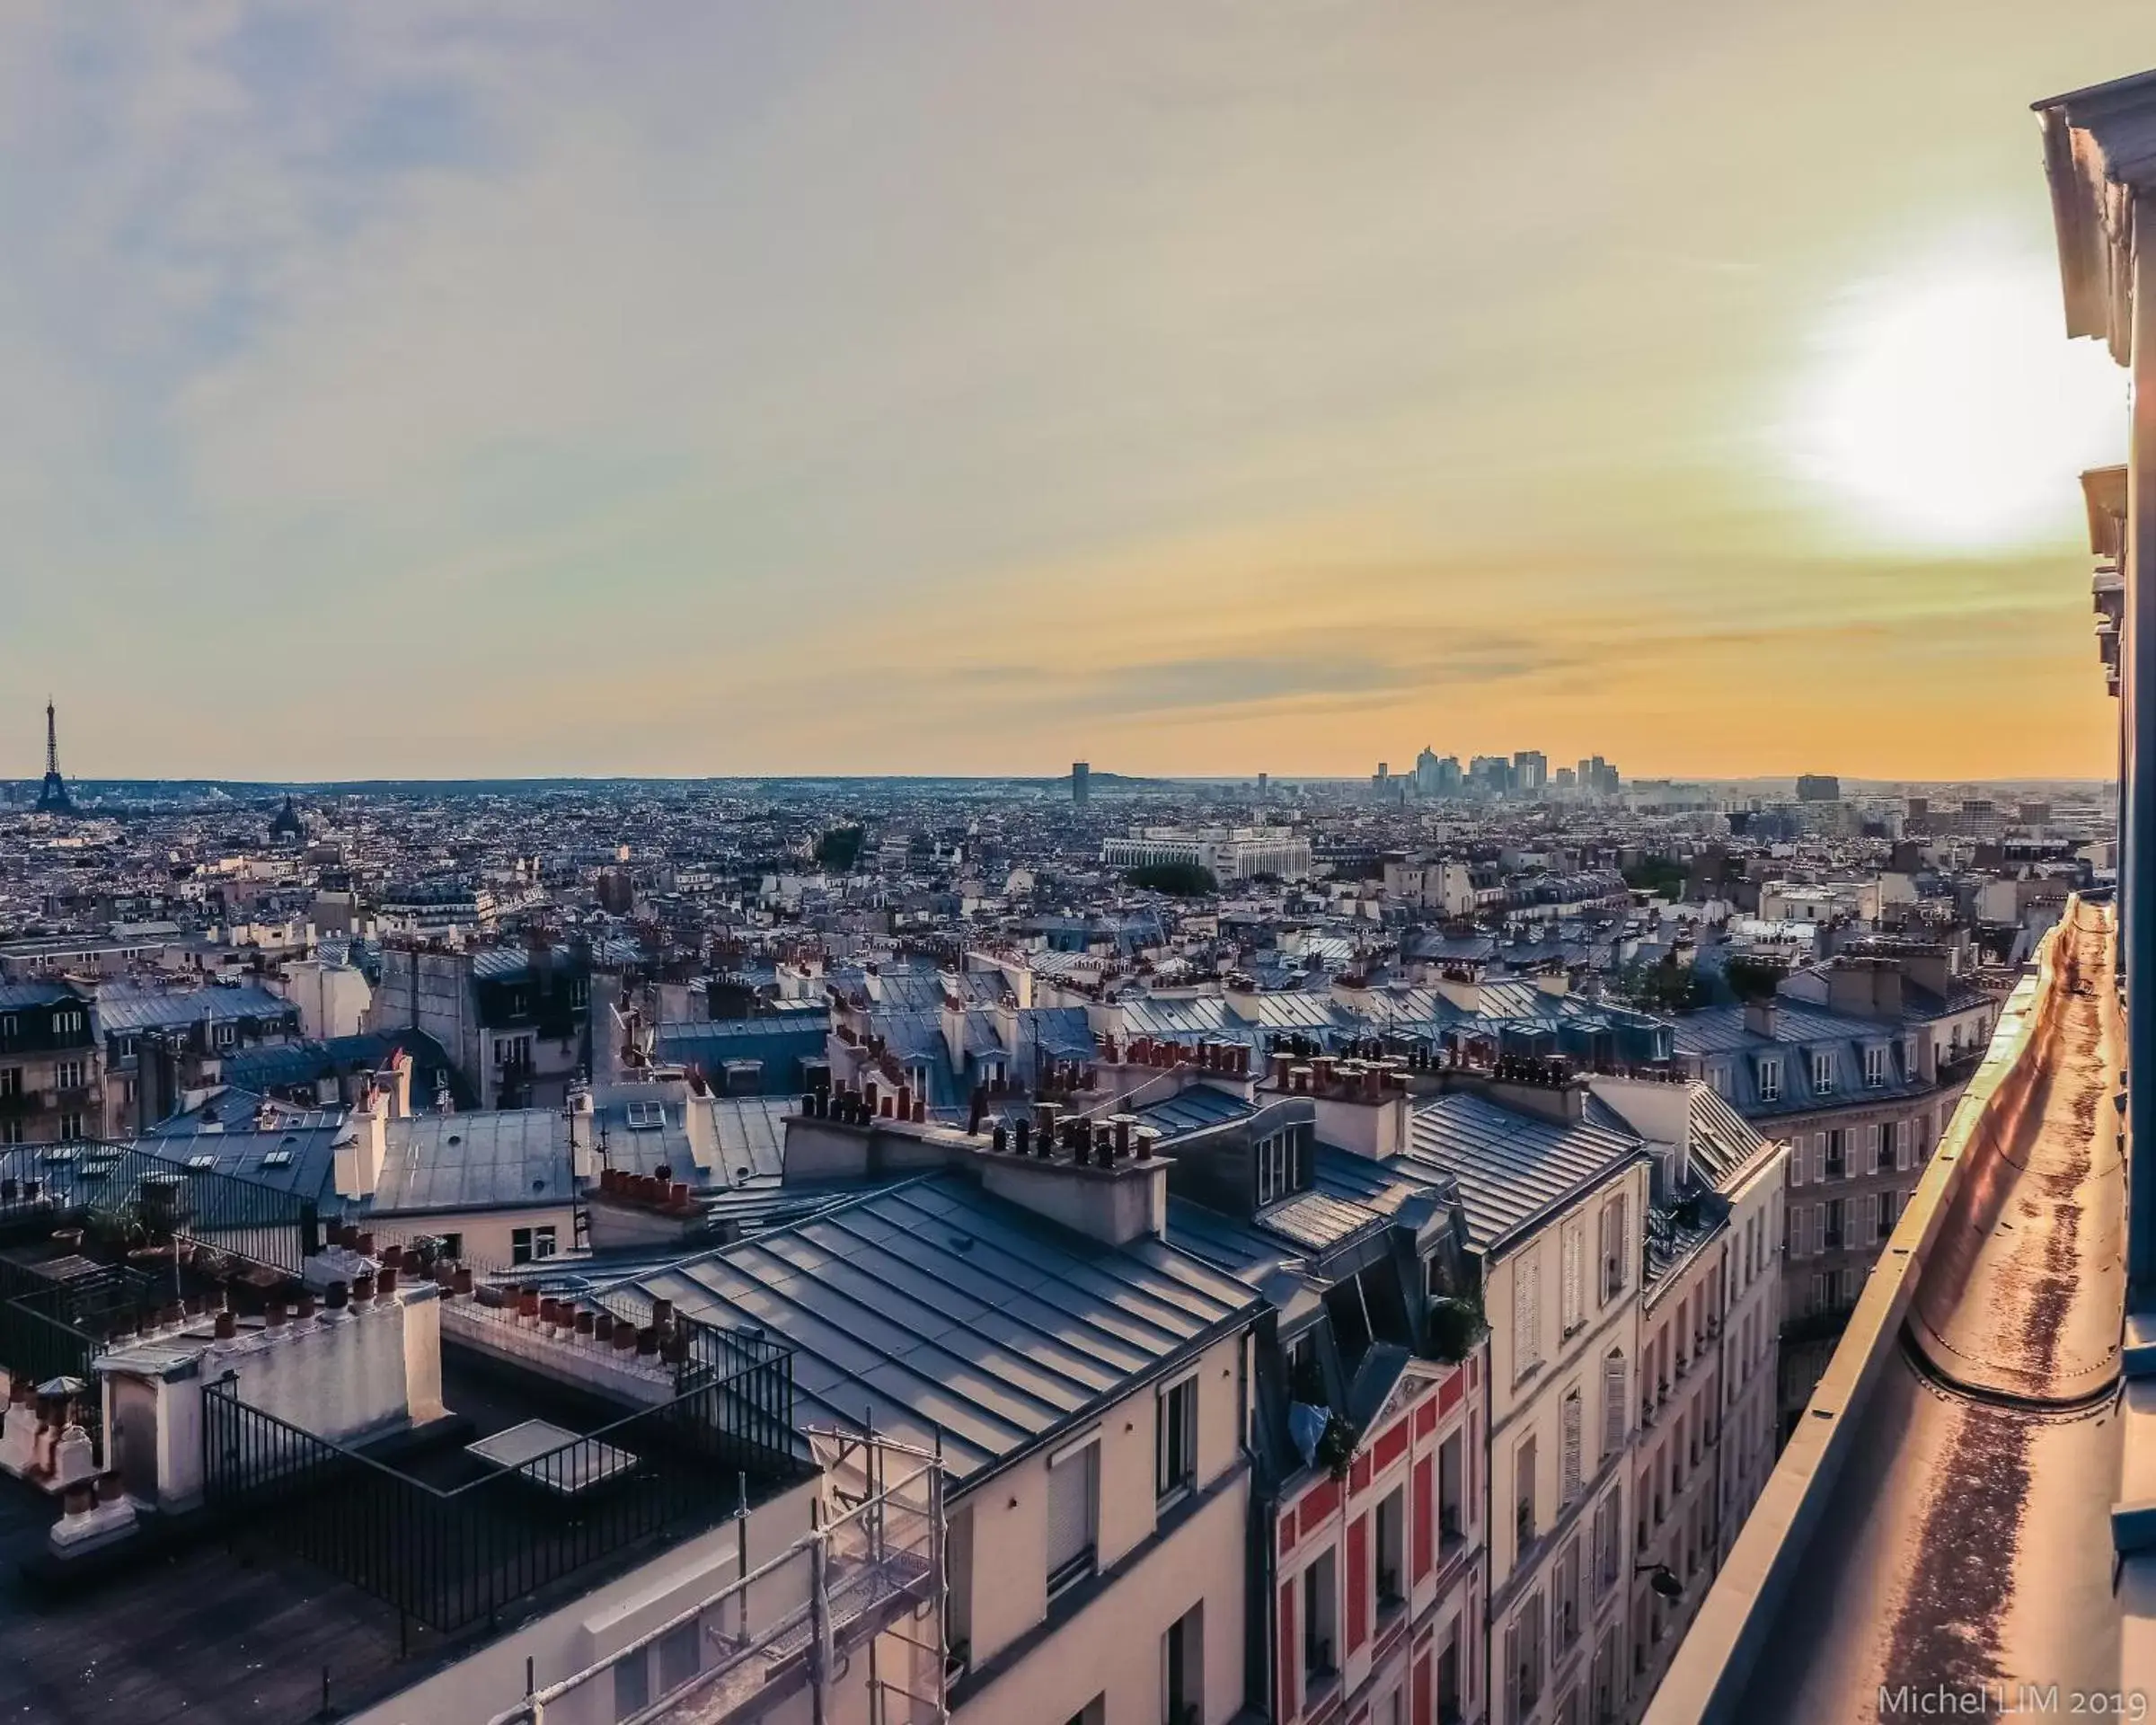 City view in Timhotel Montmartre